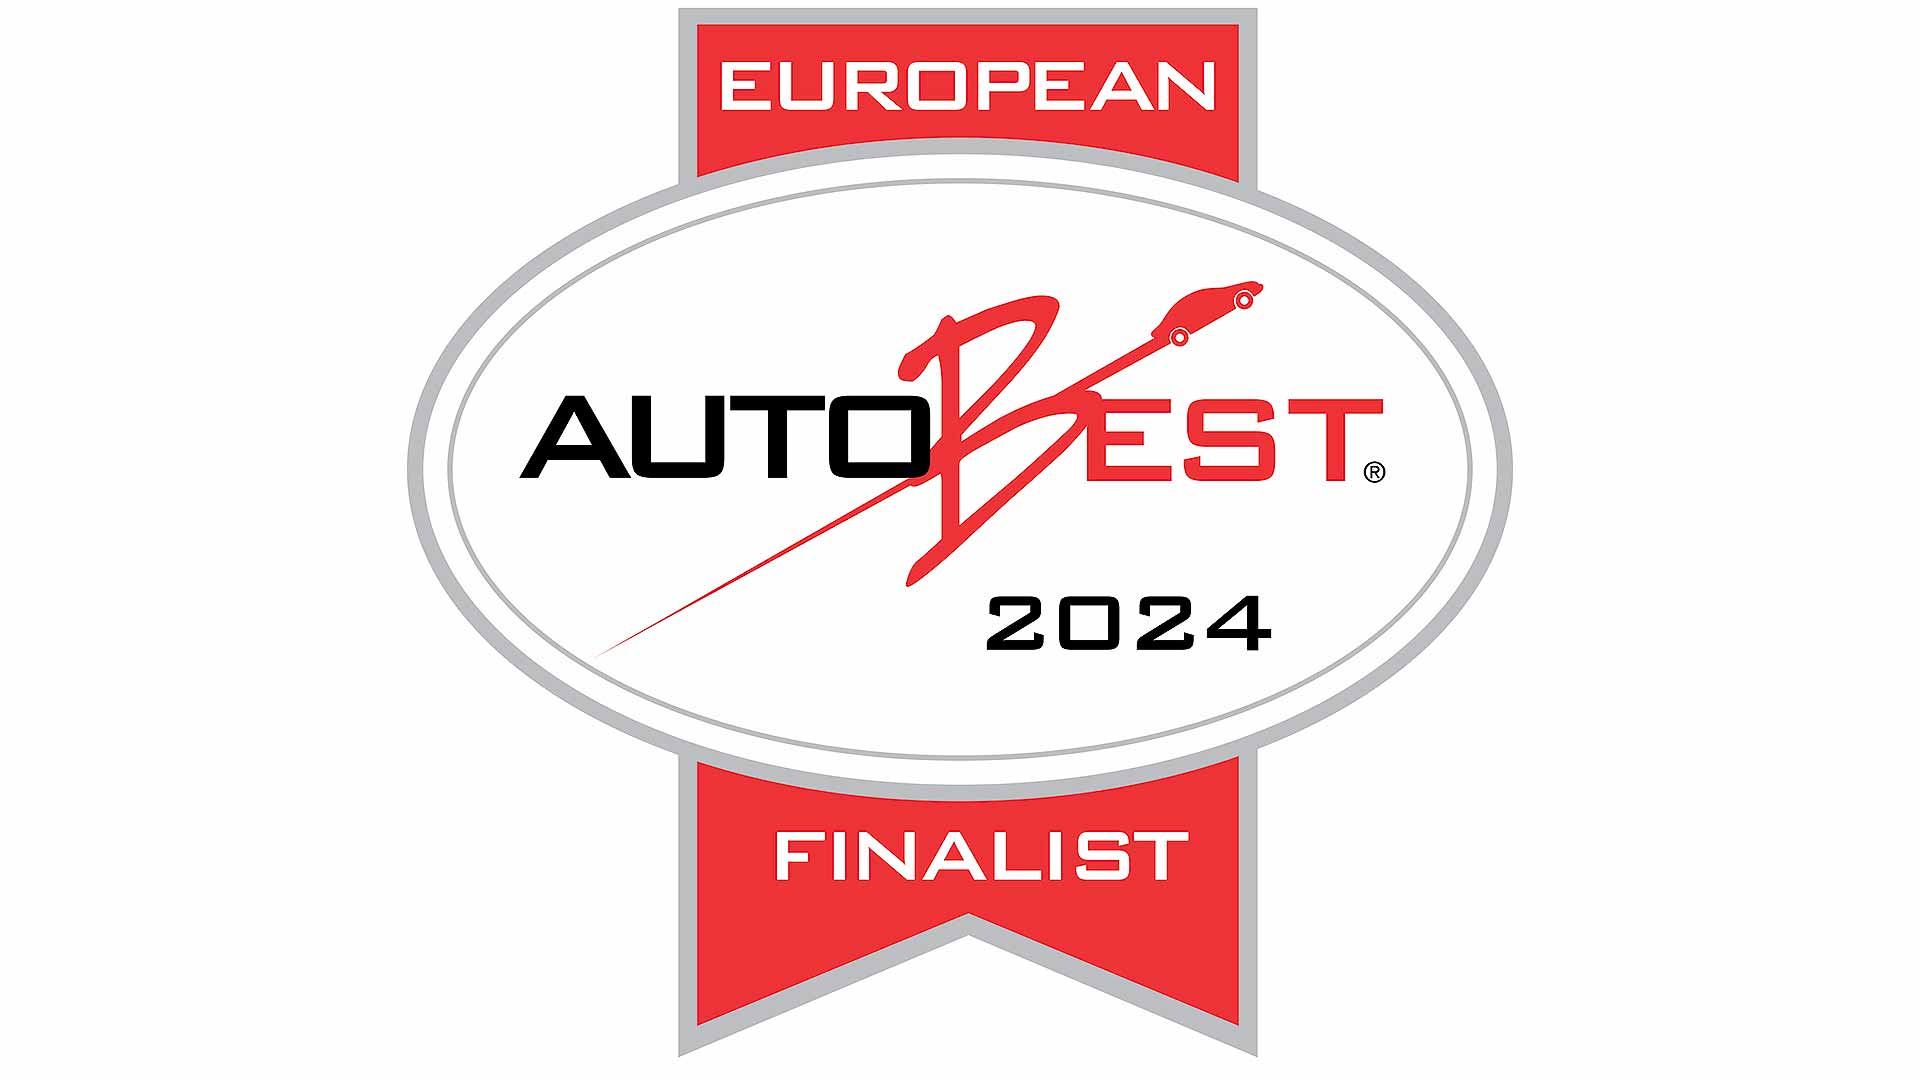 AUTOBEST Best Buy Car of Europe 2024 finalists revealed - Motoring Research